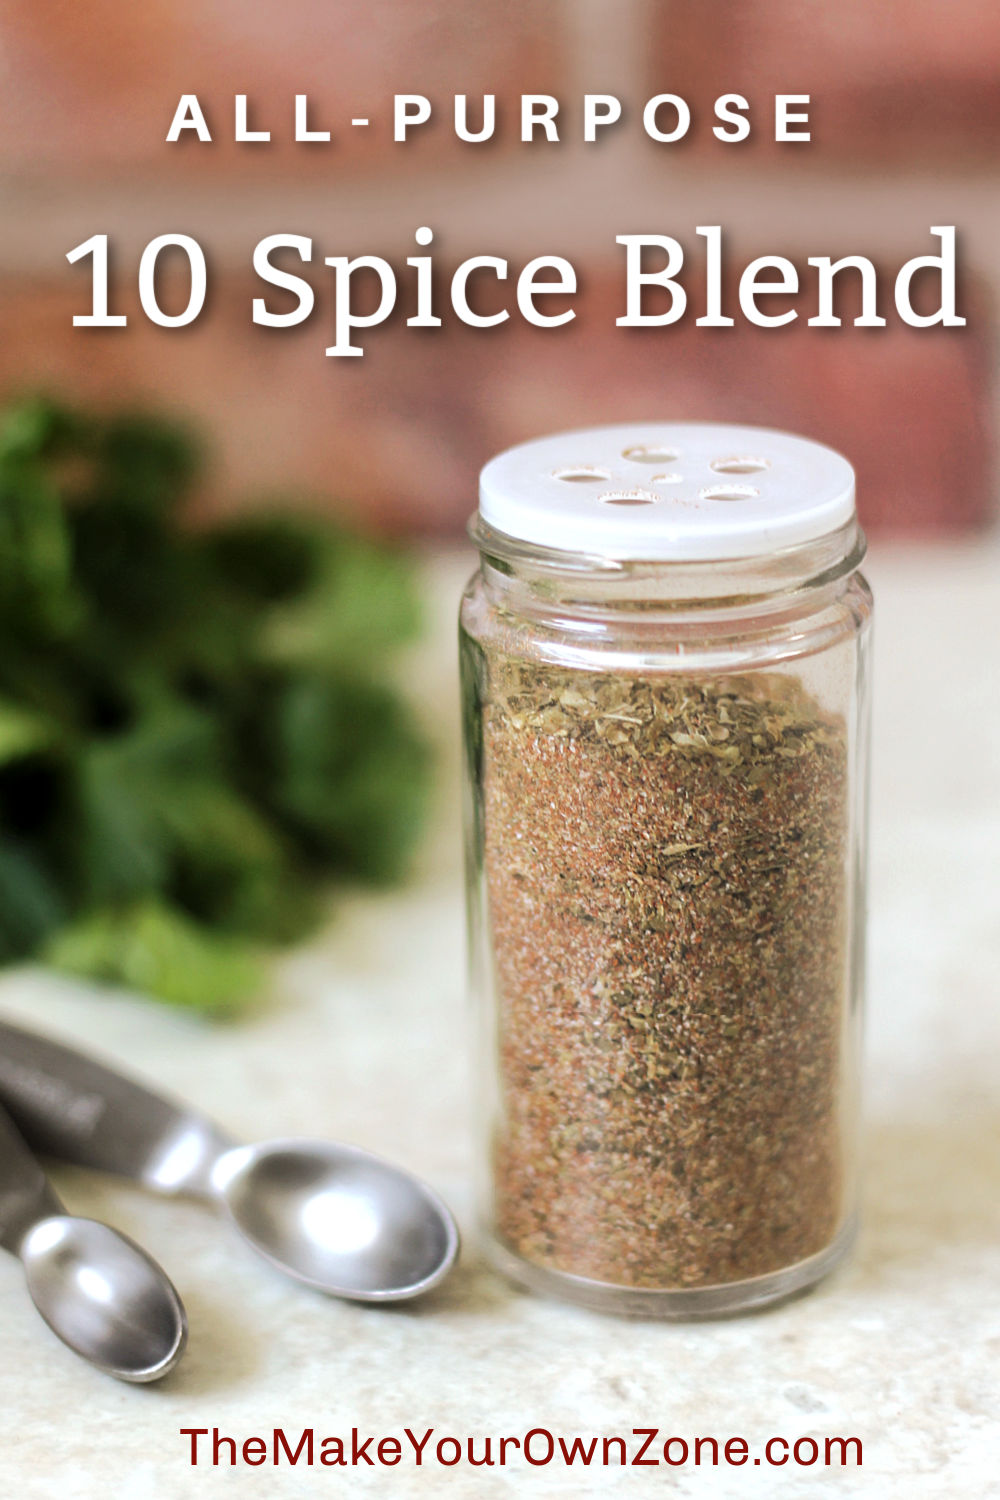 A homemade spice blend in a small glass jar.